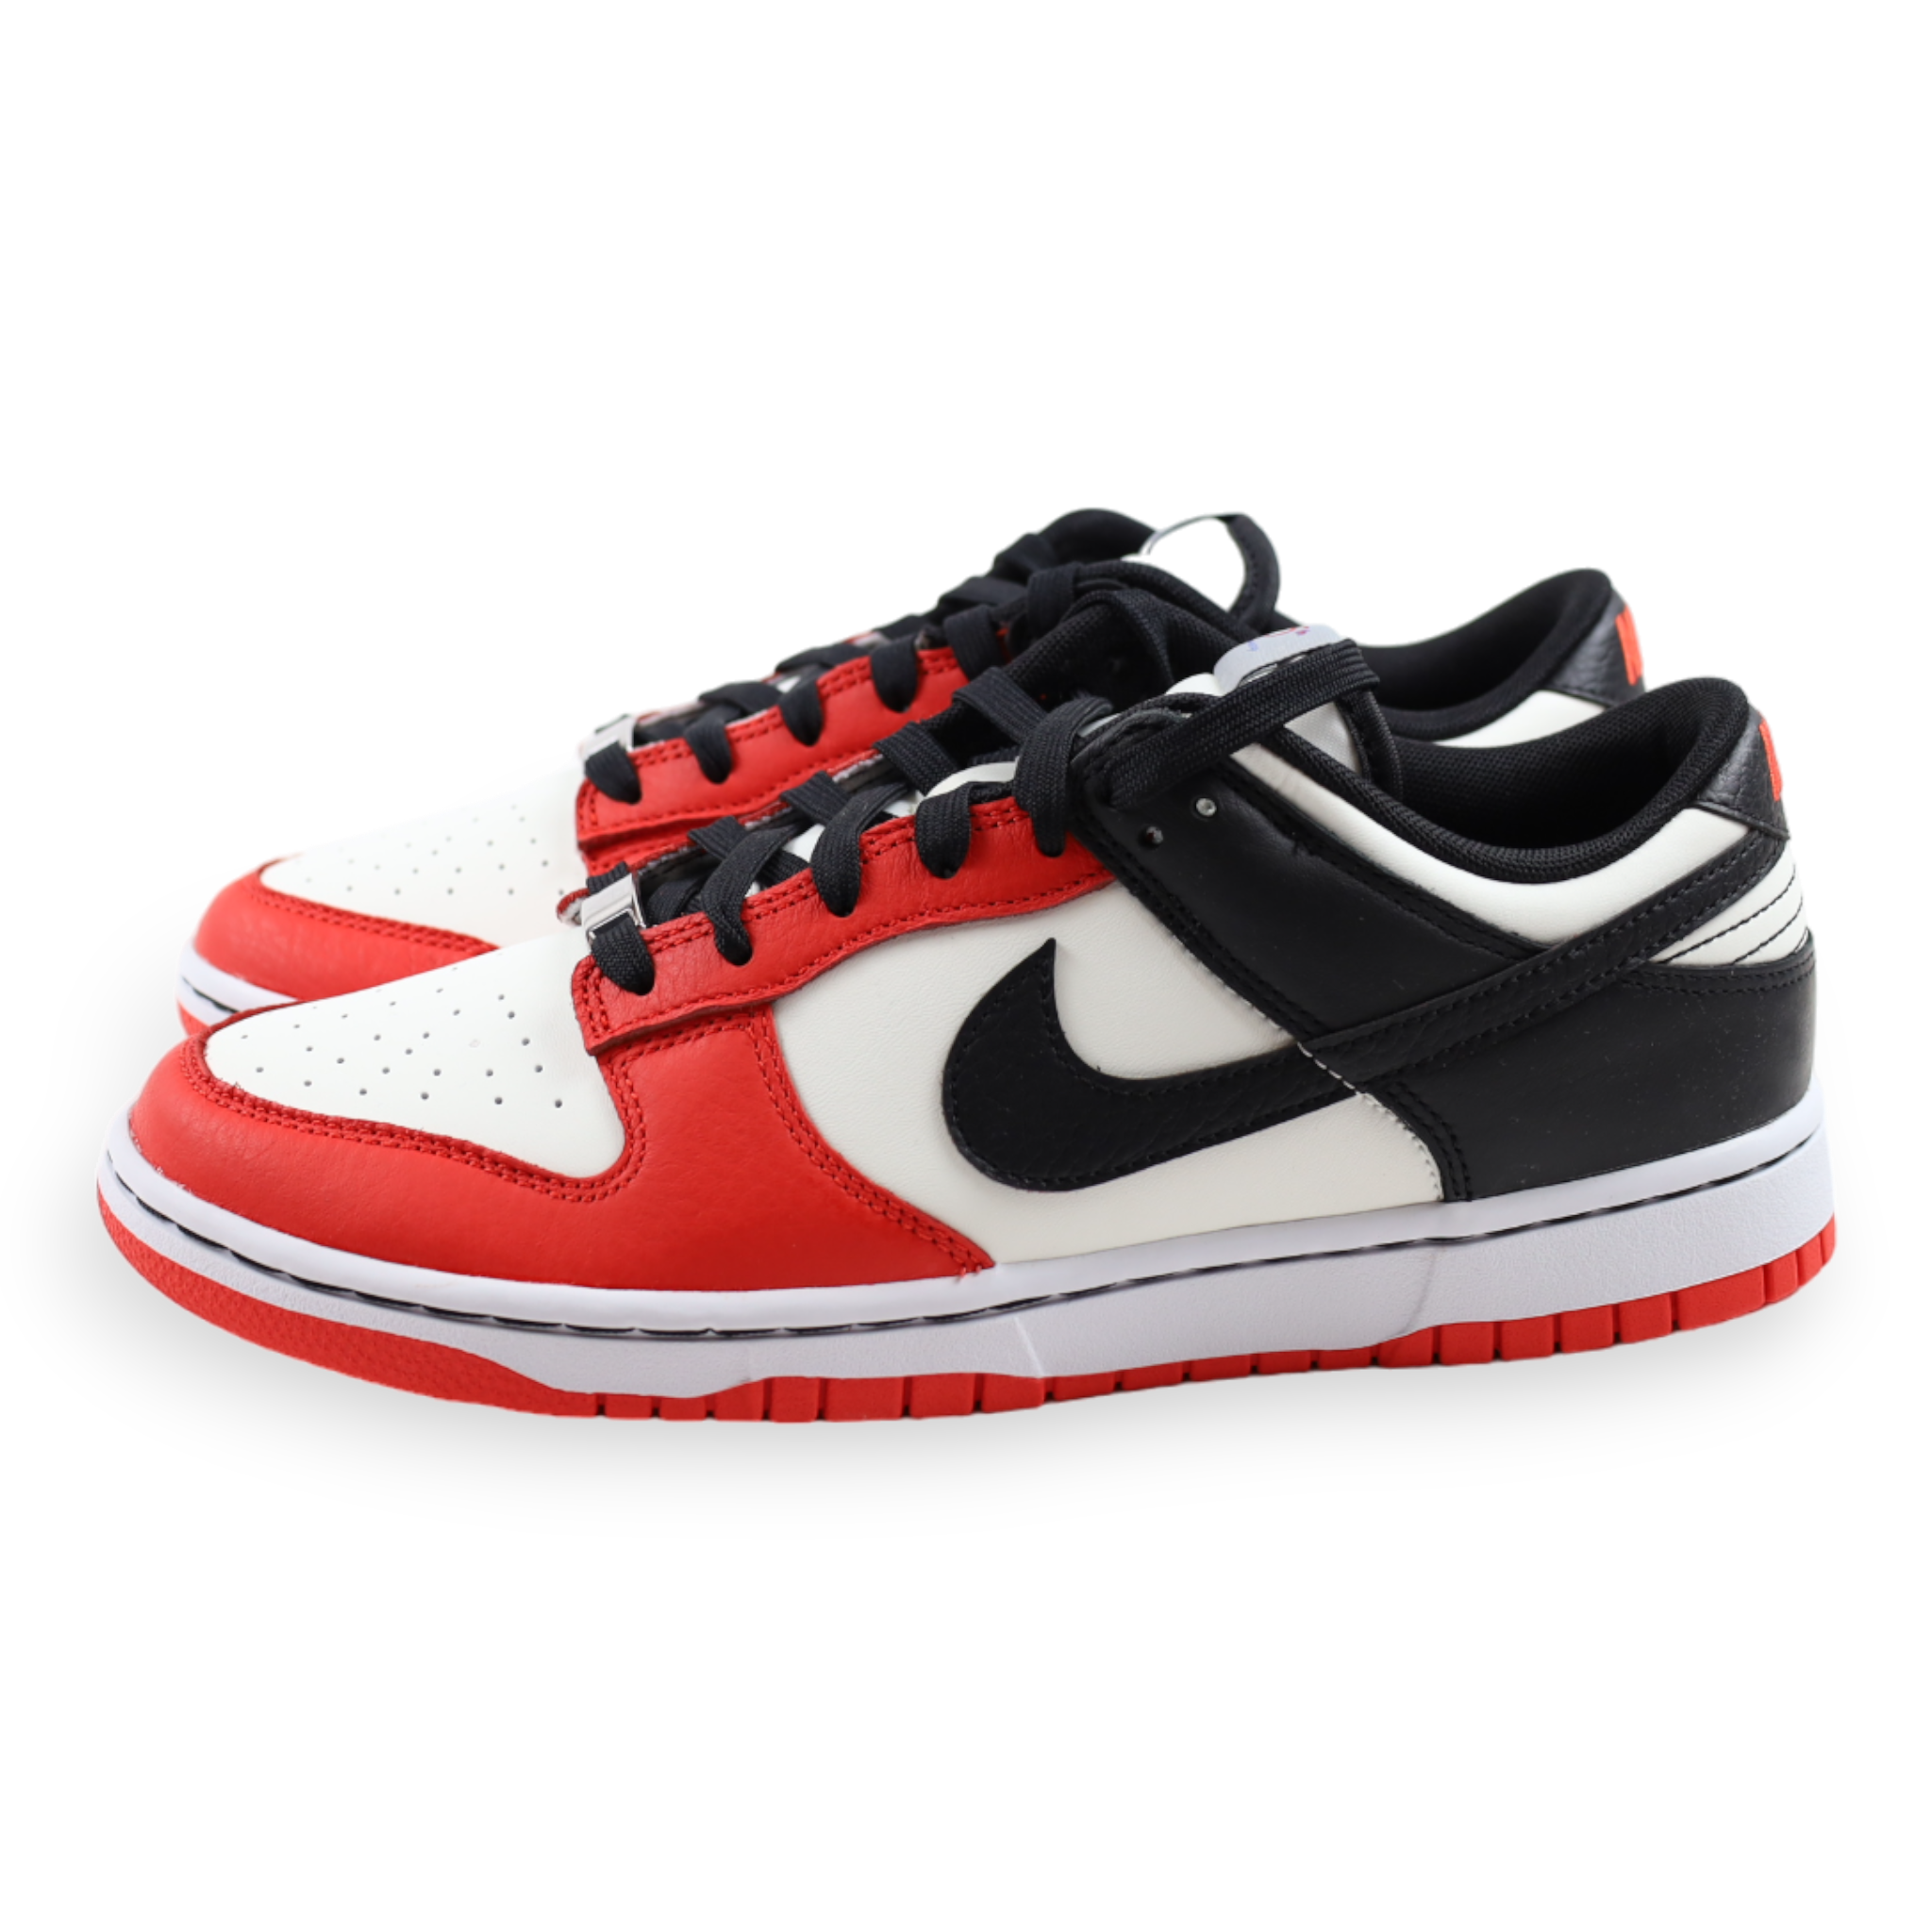 Nike Dunk Sneakers from Finland | Nike Dunk Retro Low u0026amp; High – Sneakers  in Finland